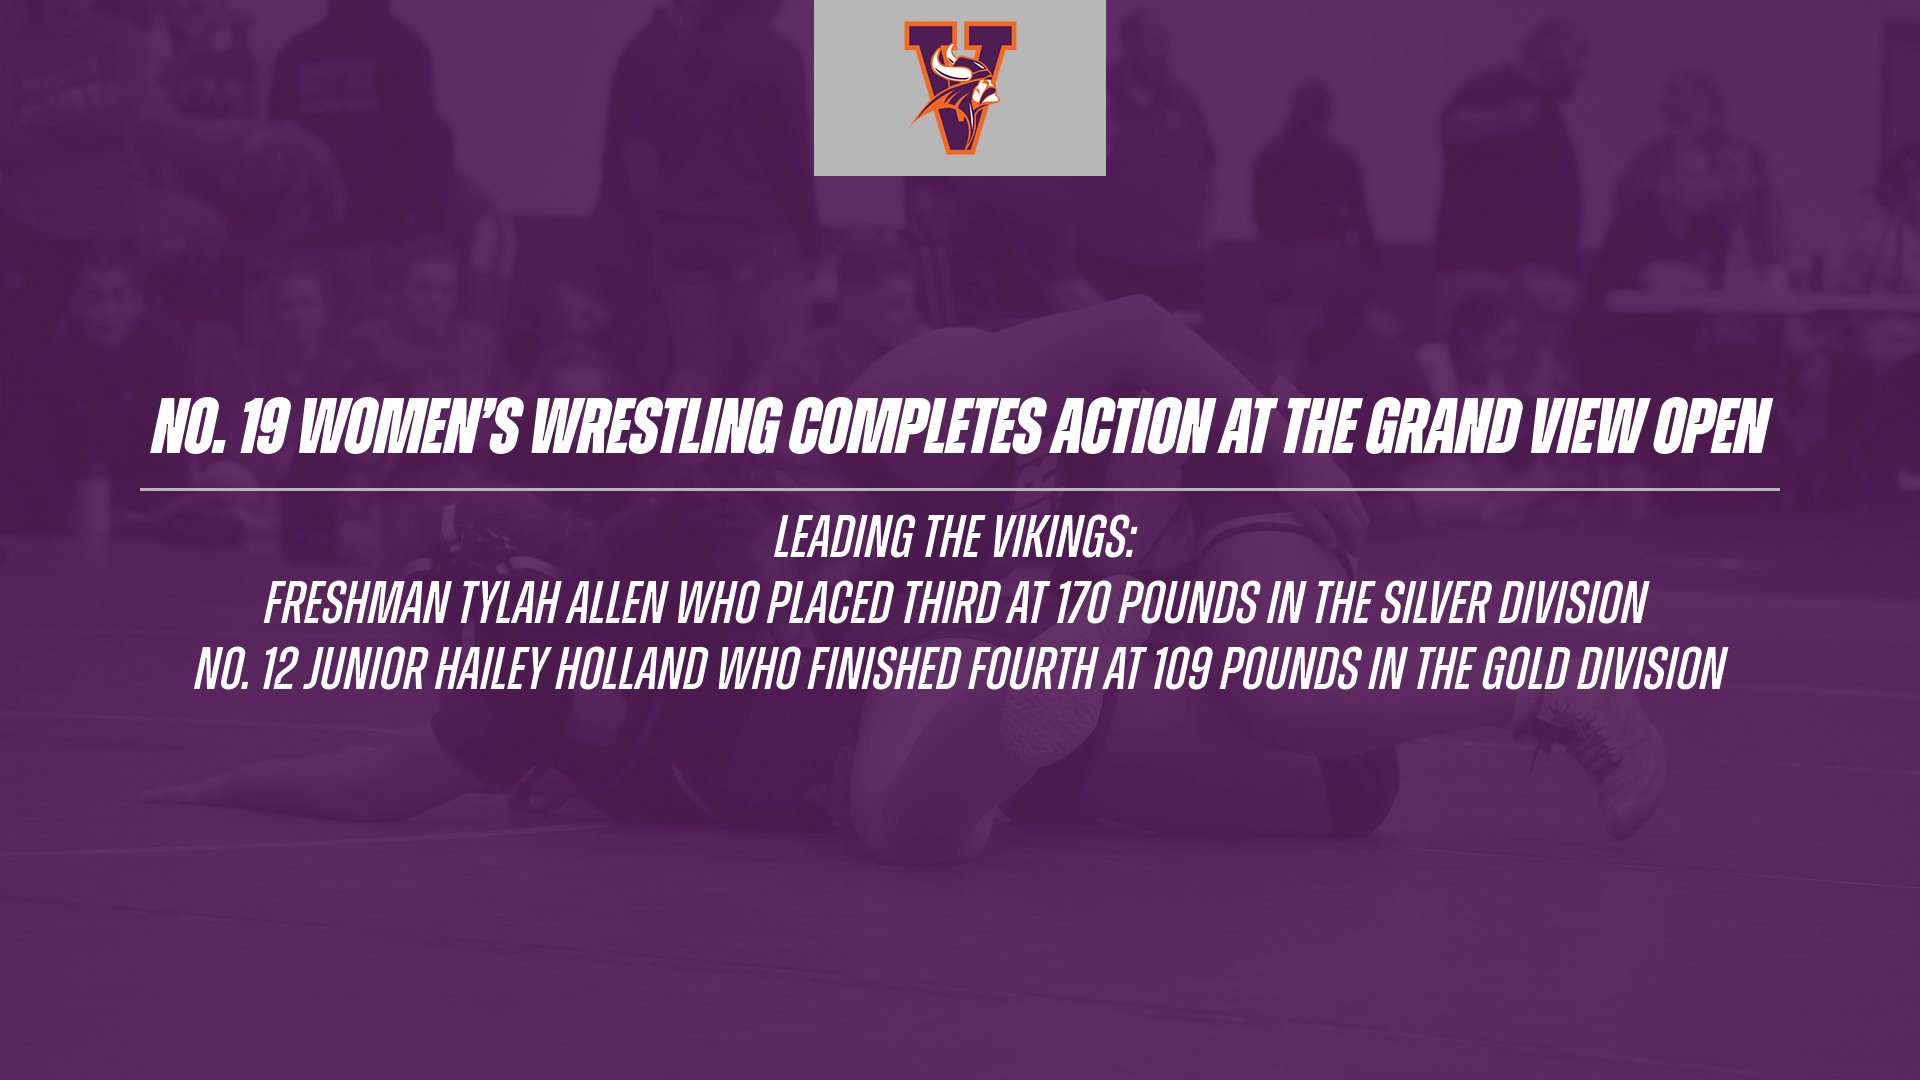 No. 19 Women's Wrestling Completes Action at the Grand View Open